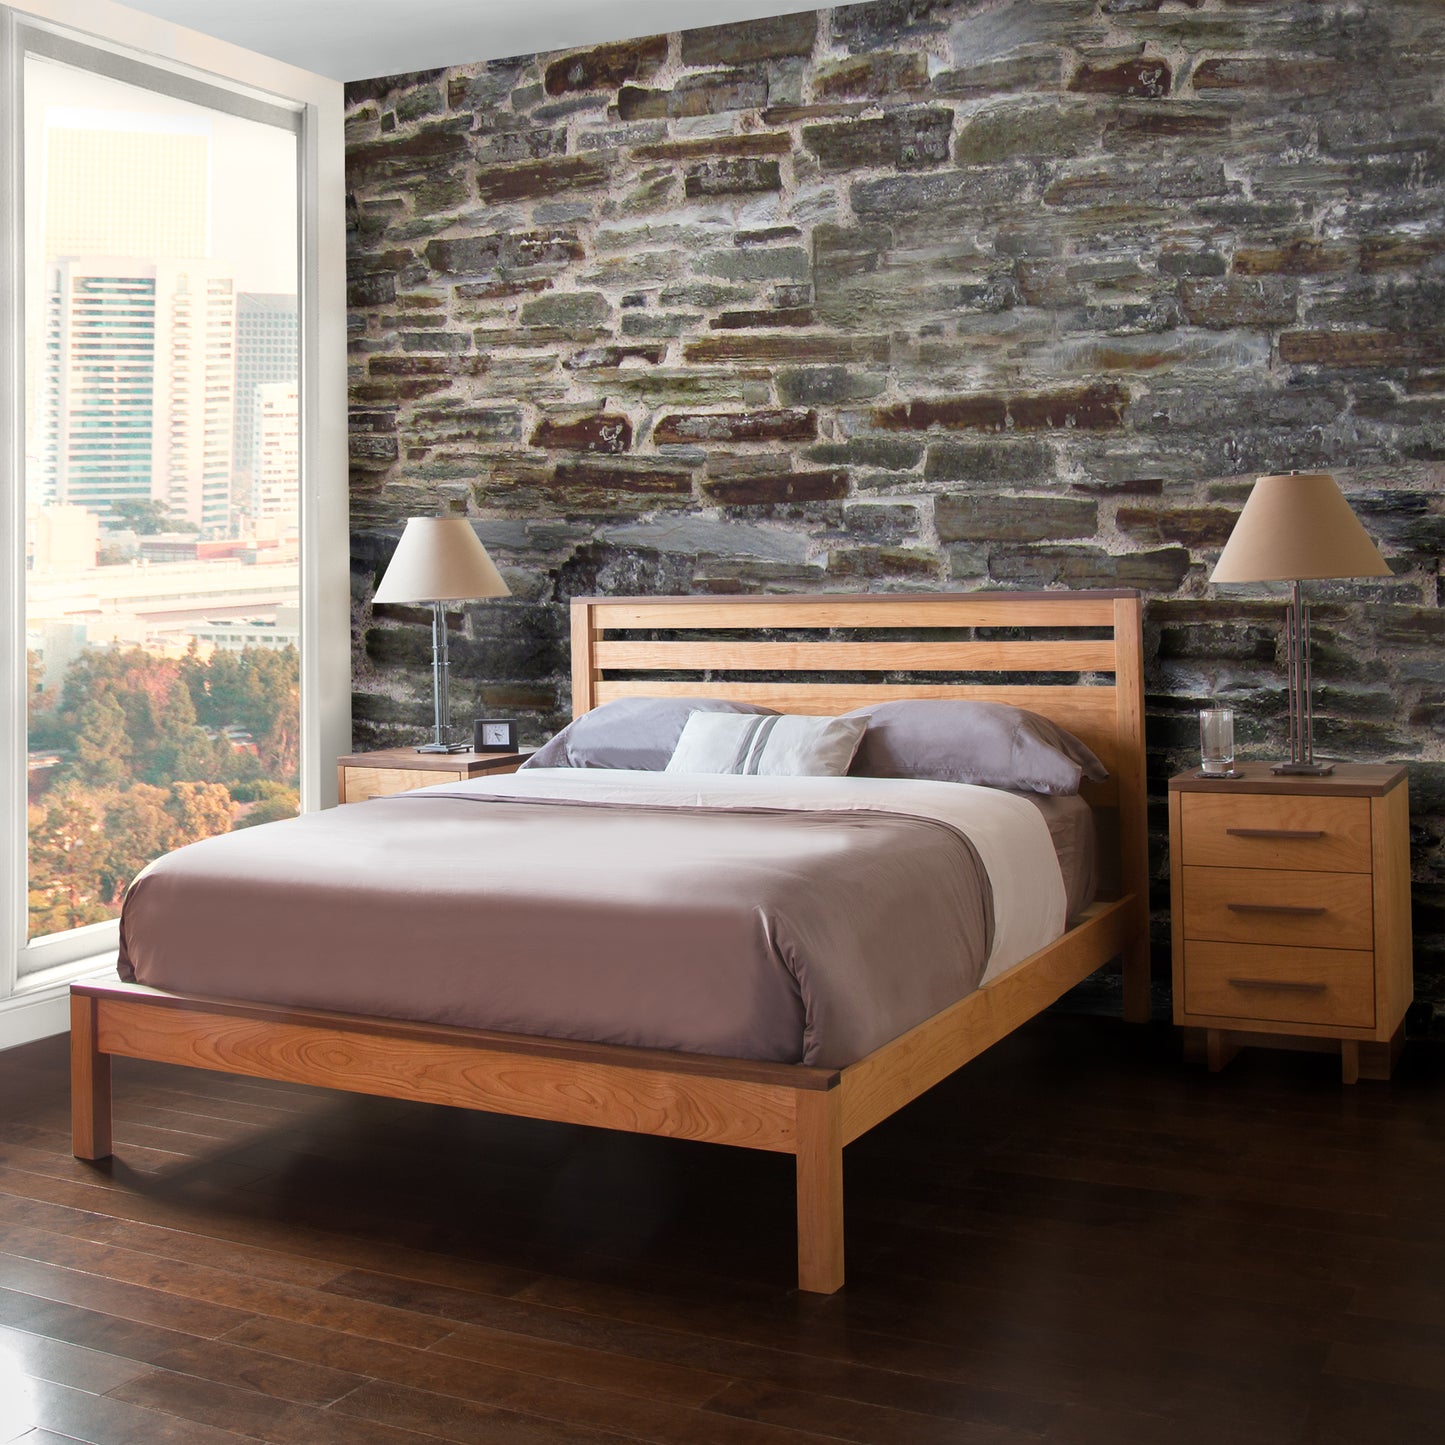 A modern bedroom with a solid Vermont Furniture Designs Skyline Panel Bed, matching nightstands, and beige bedding against a stone accent wall, with a cityscape visible through the window.